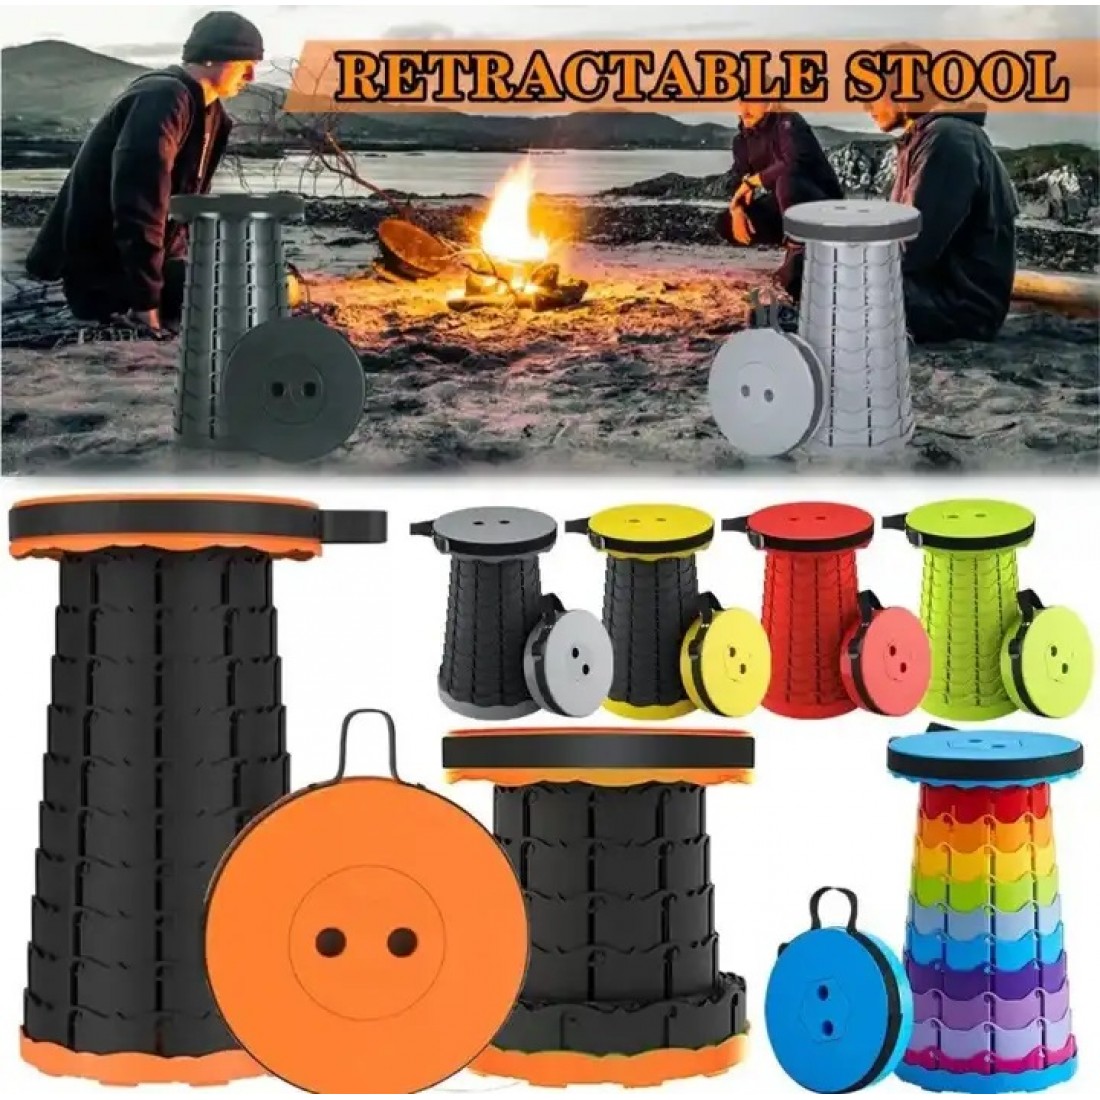 Outdoor Portable Telescopic Stool | Outdoor Fishing Picnic Camping Travel Chair Seat